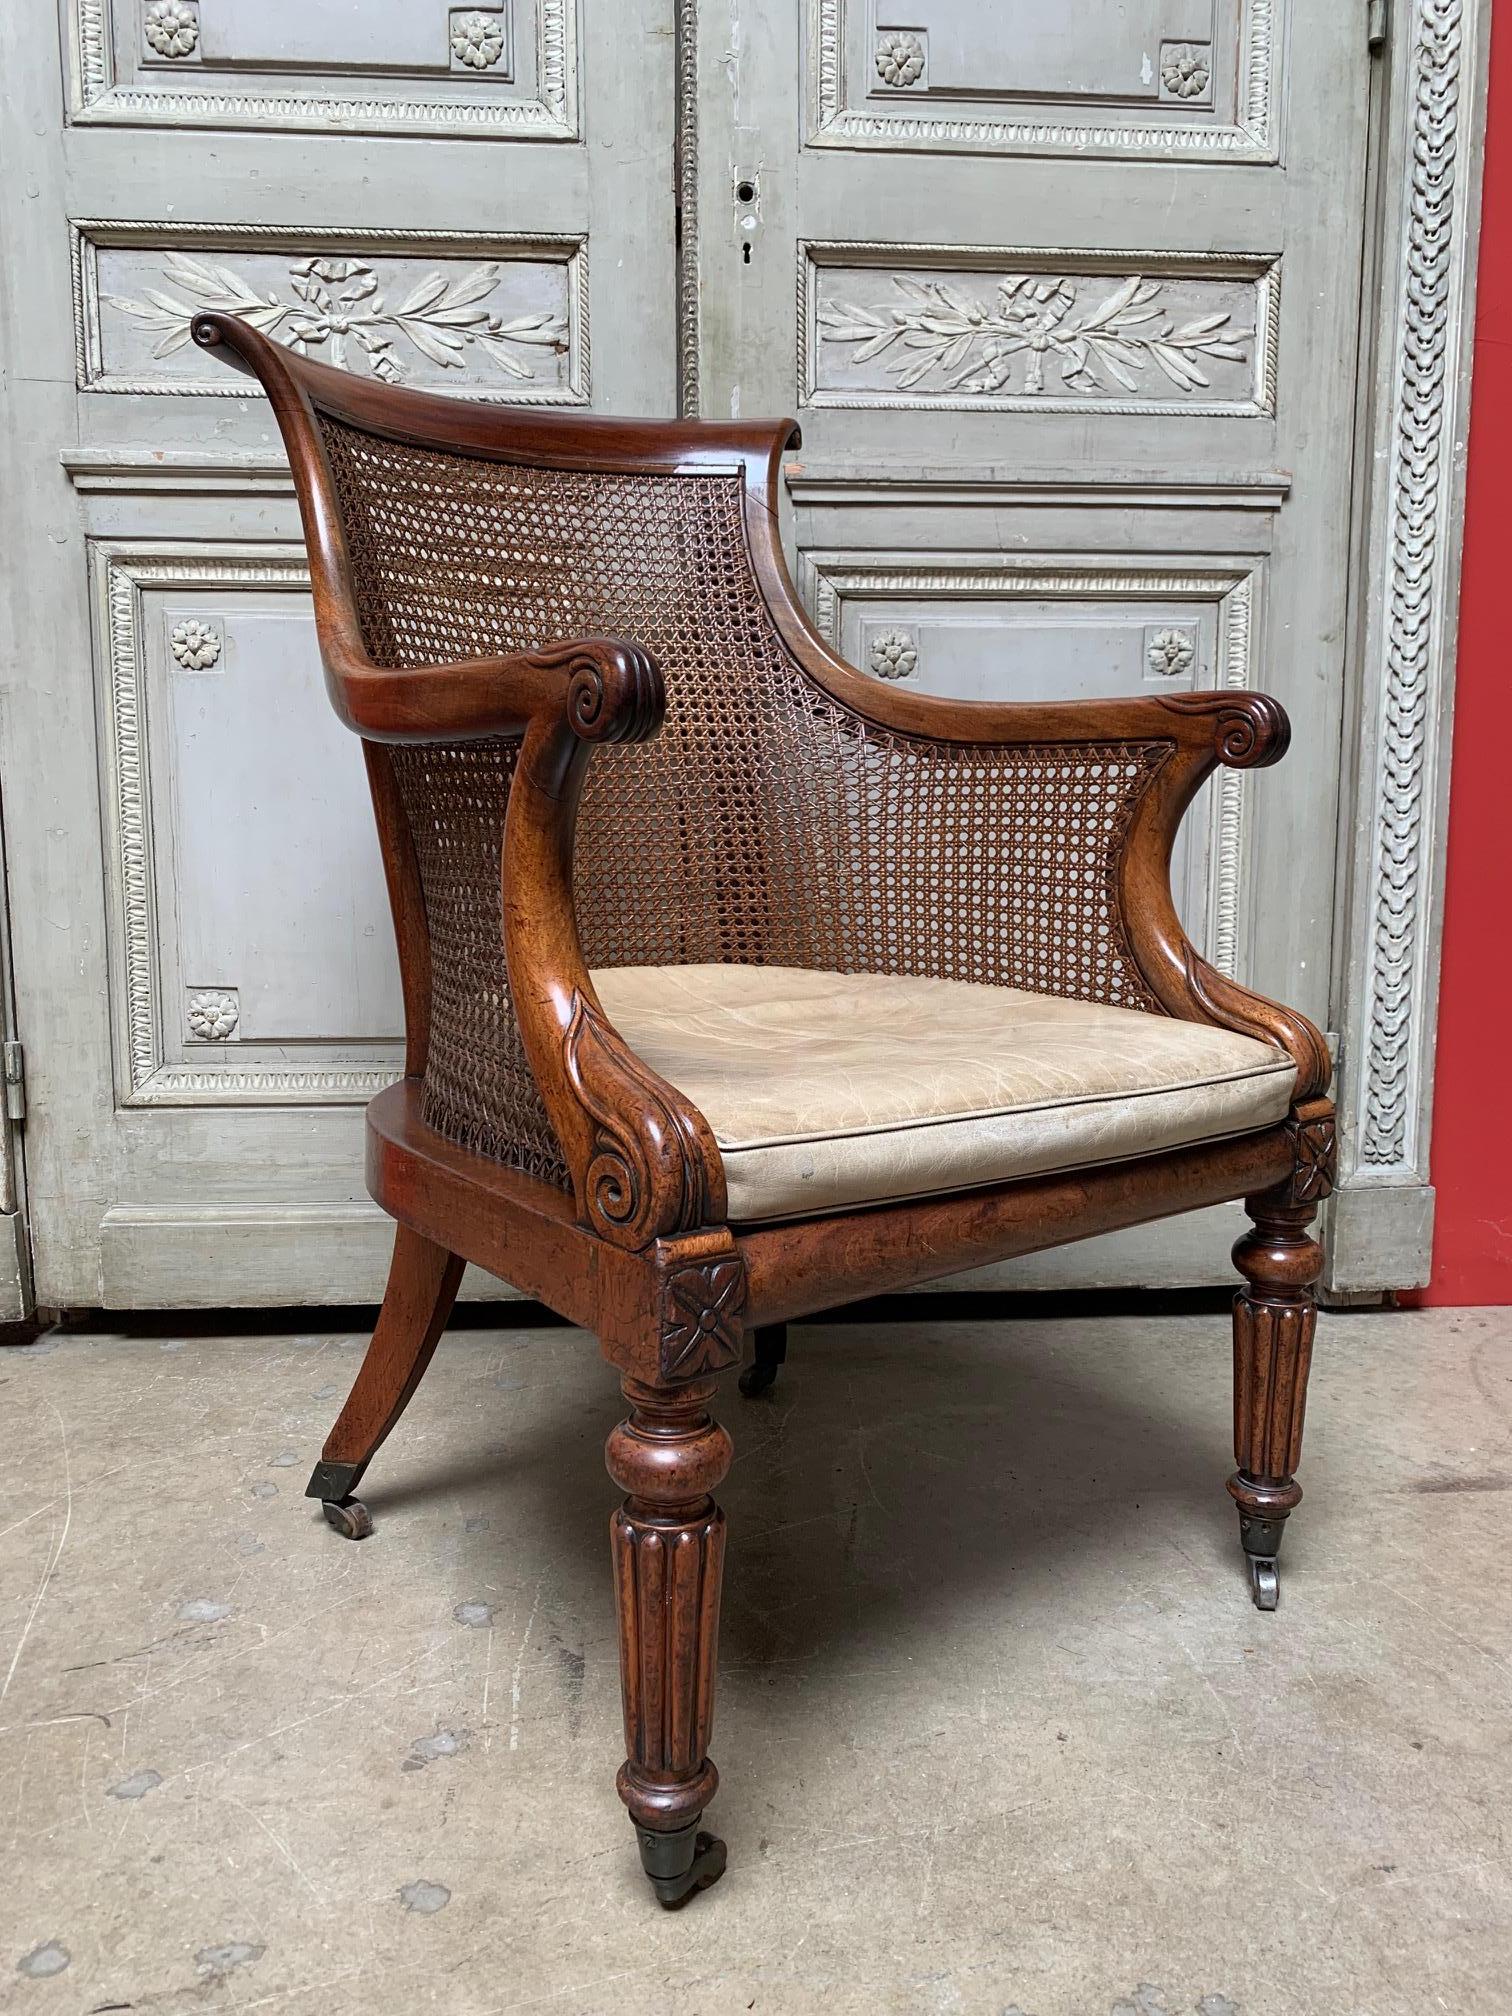 English William IV carved walnut and cane library armchair with brass casters and a taupe leather seat cushion. This armchair has a wonderful patina and the cane is in good condition. The leather cushion is old but still usable.